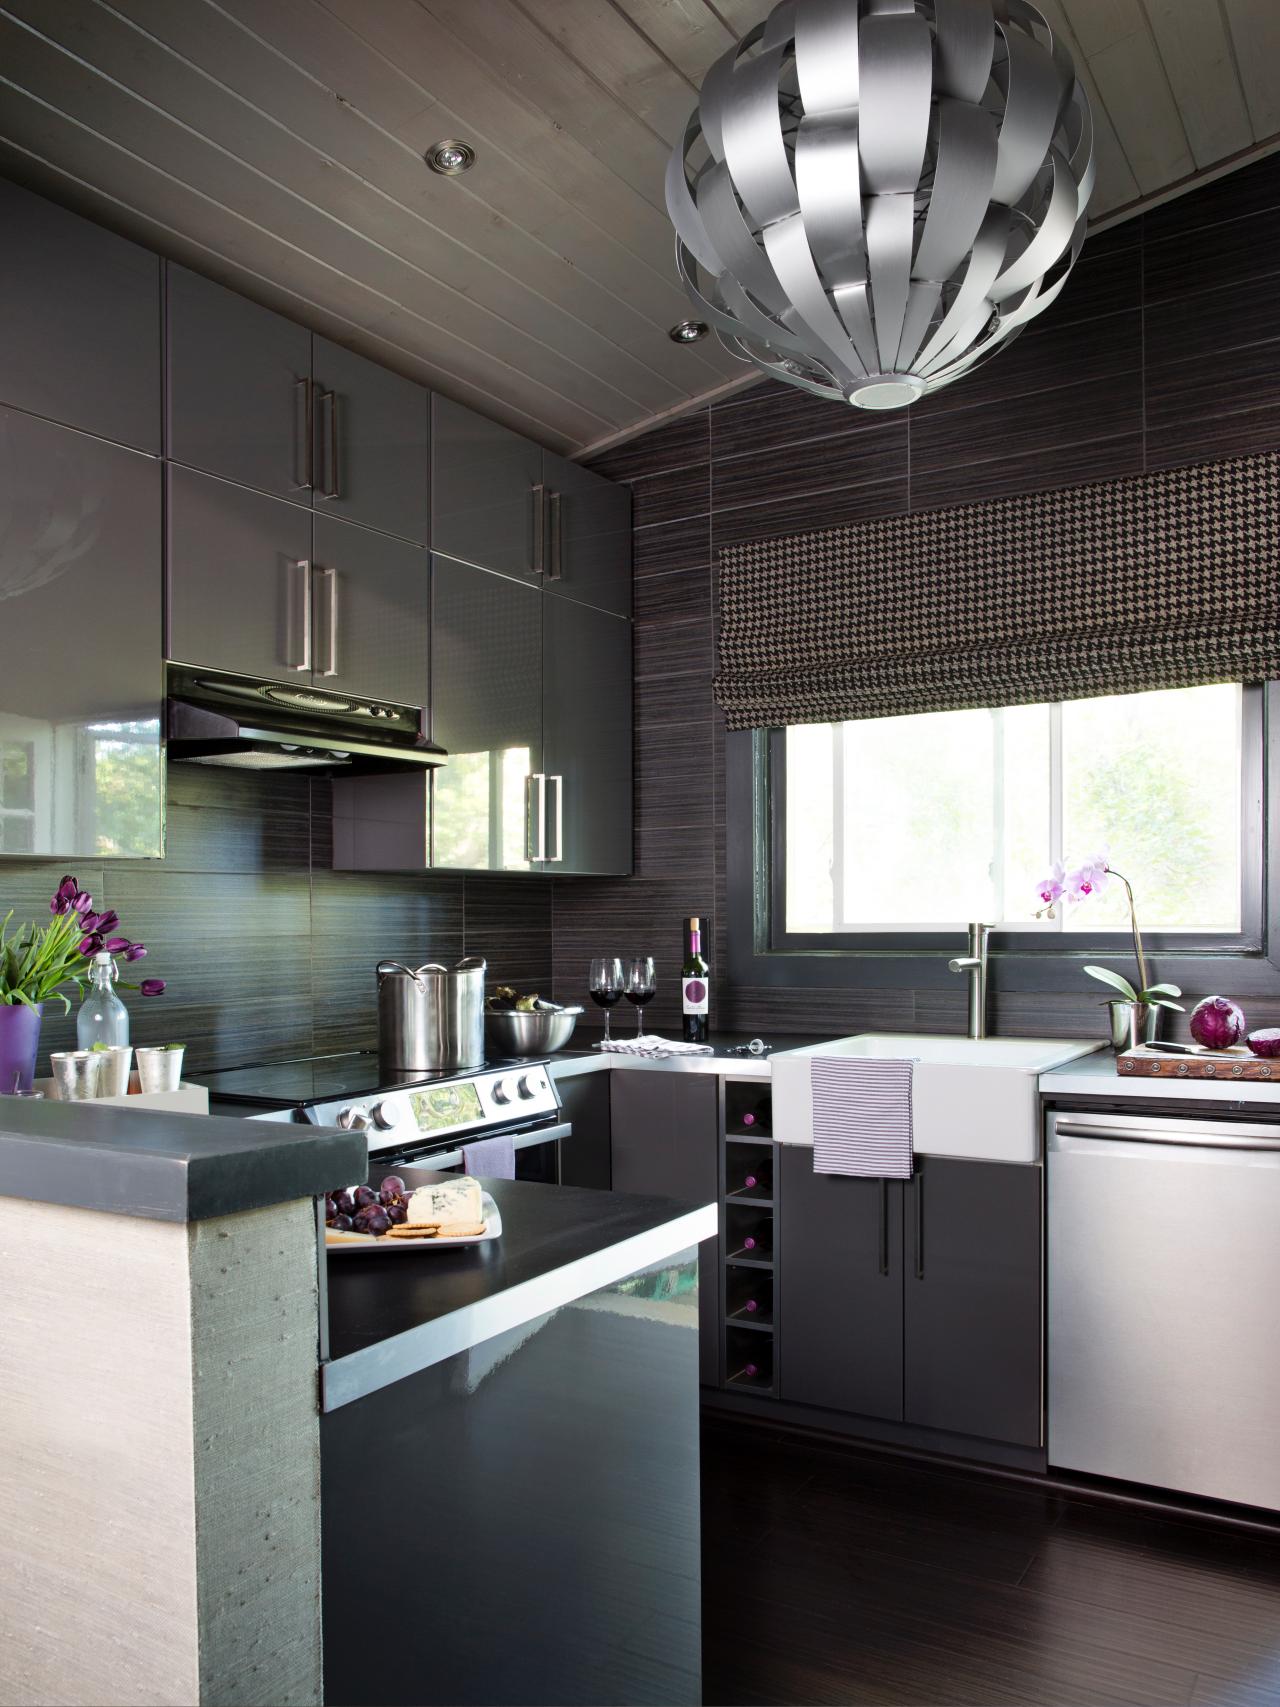 little contemporary kitchen area style concepts: hgtv images & & suggestions|hgtv